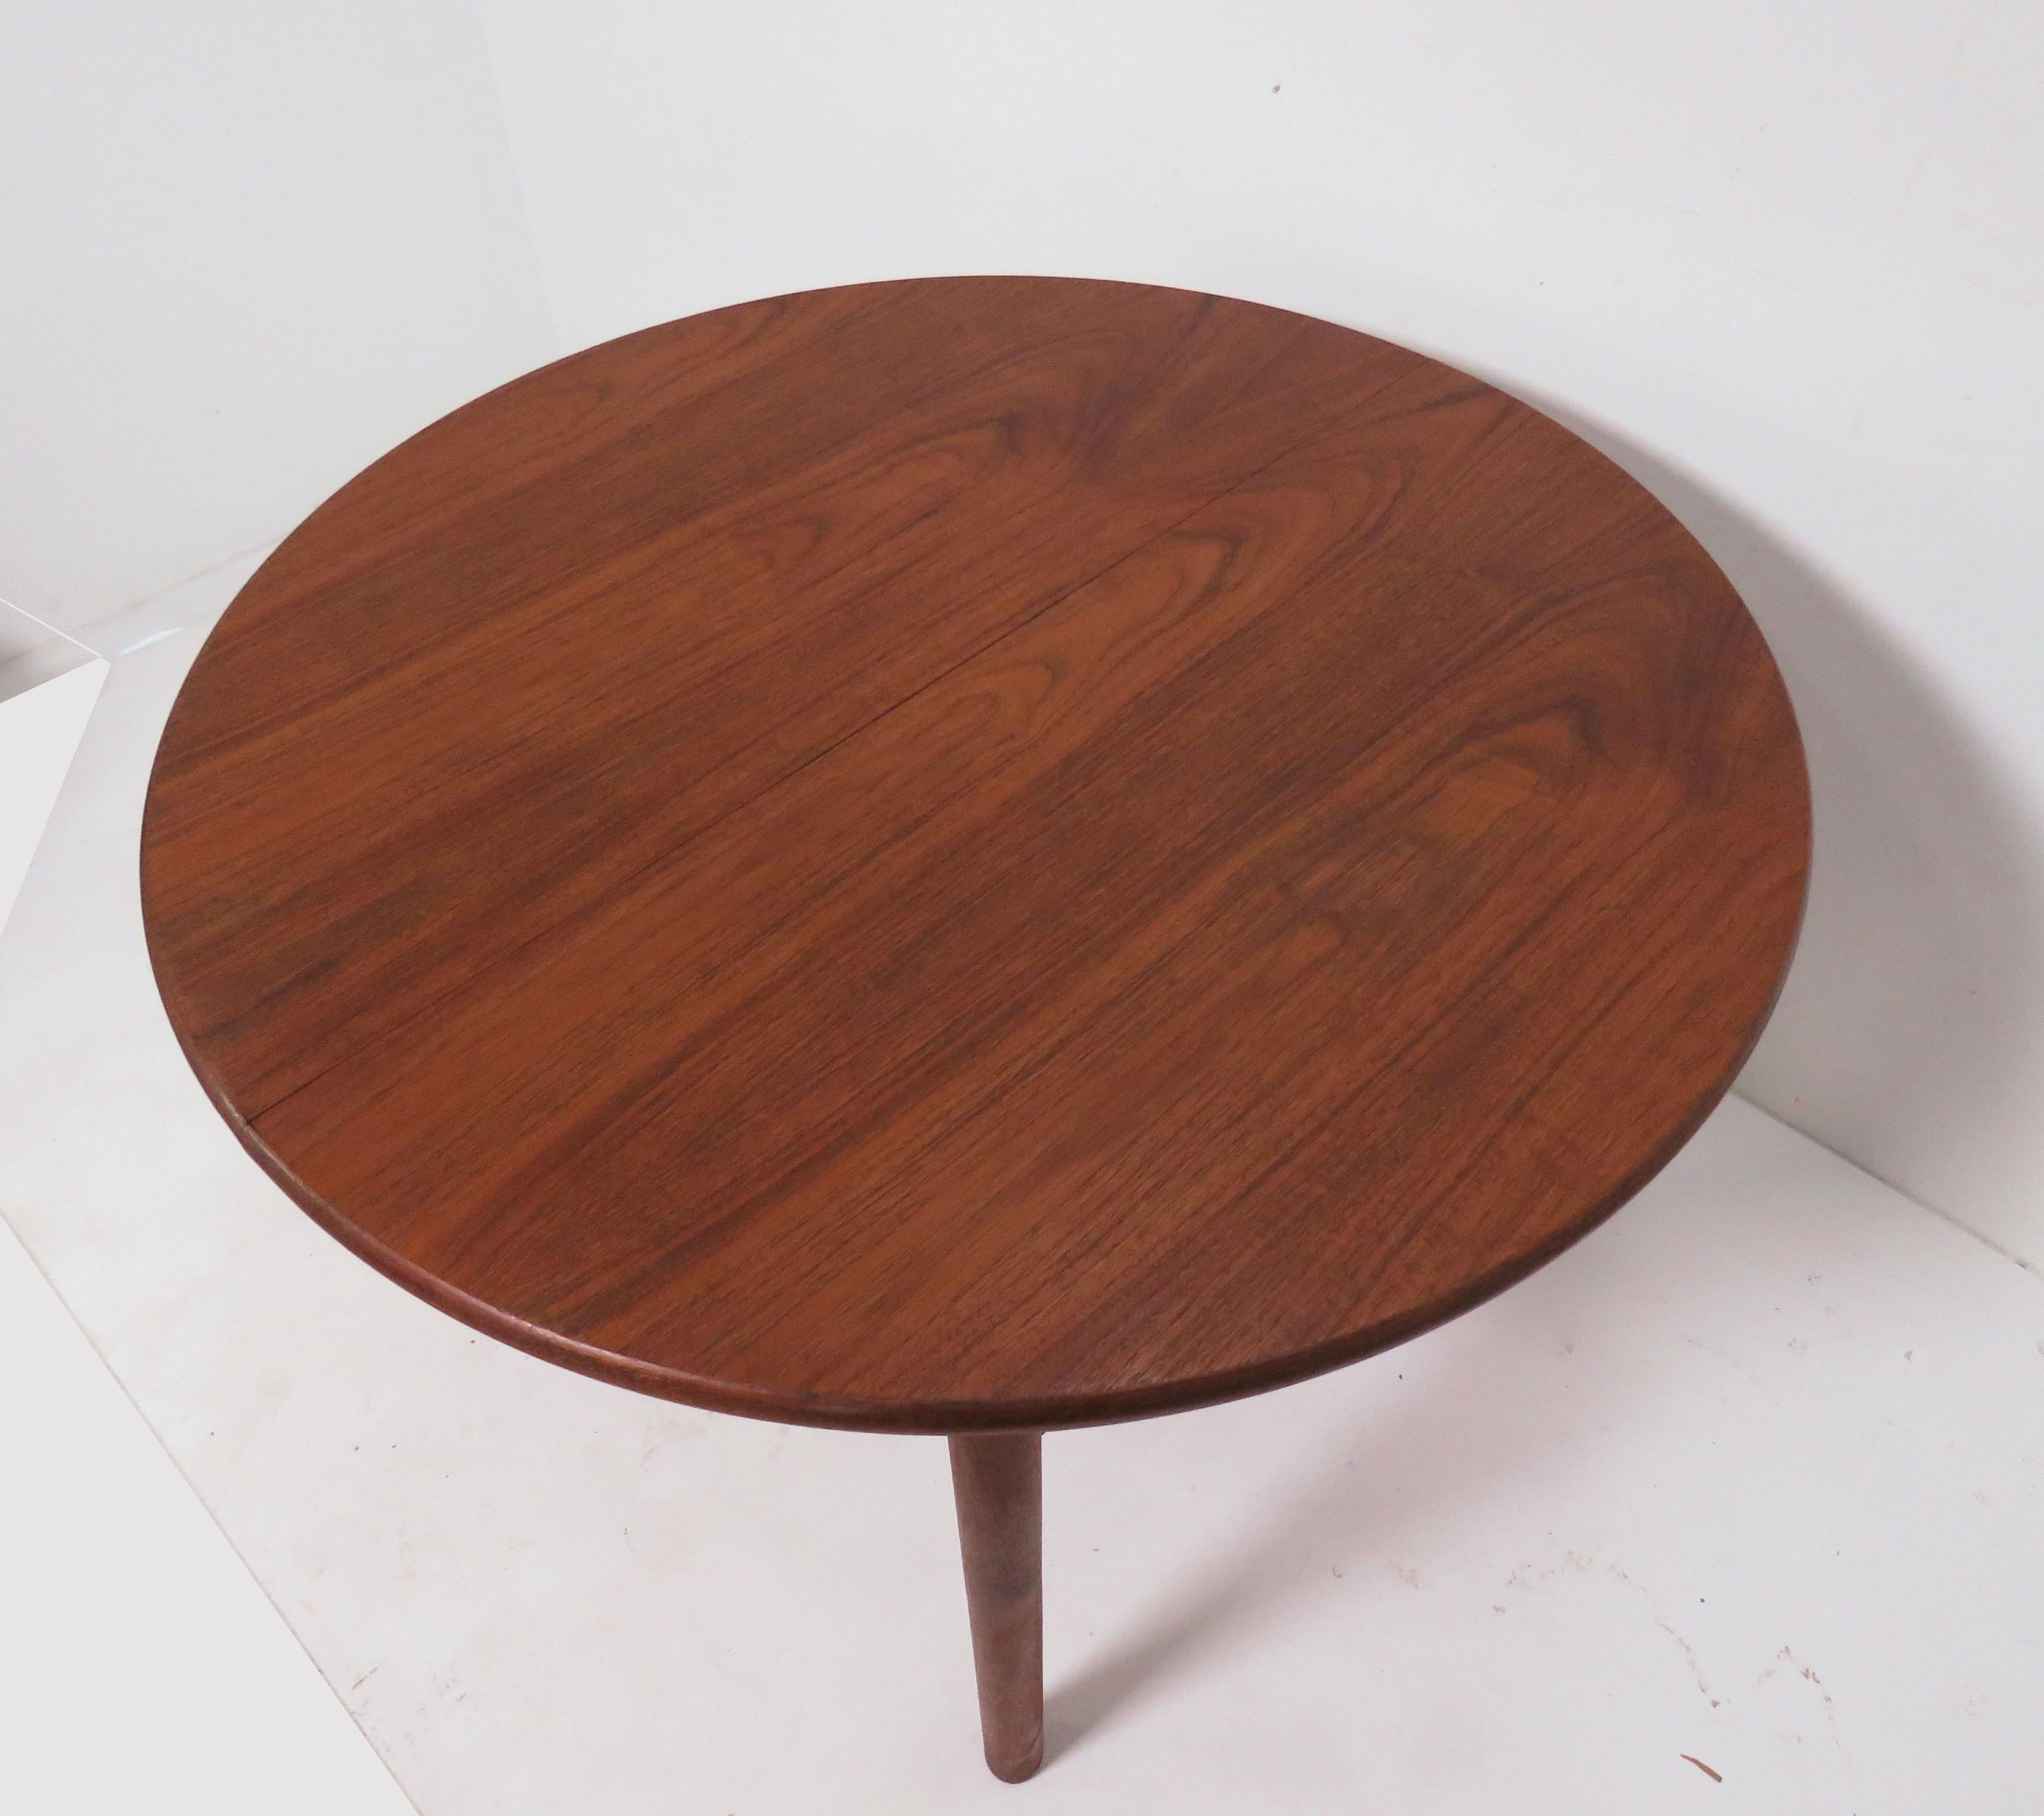 Mid-20th Century Kofod-Larsen Danish Teak and Padouk Dining Table with Butterfly Leaf